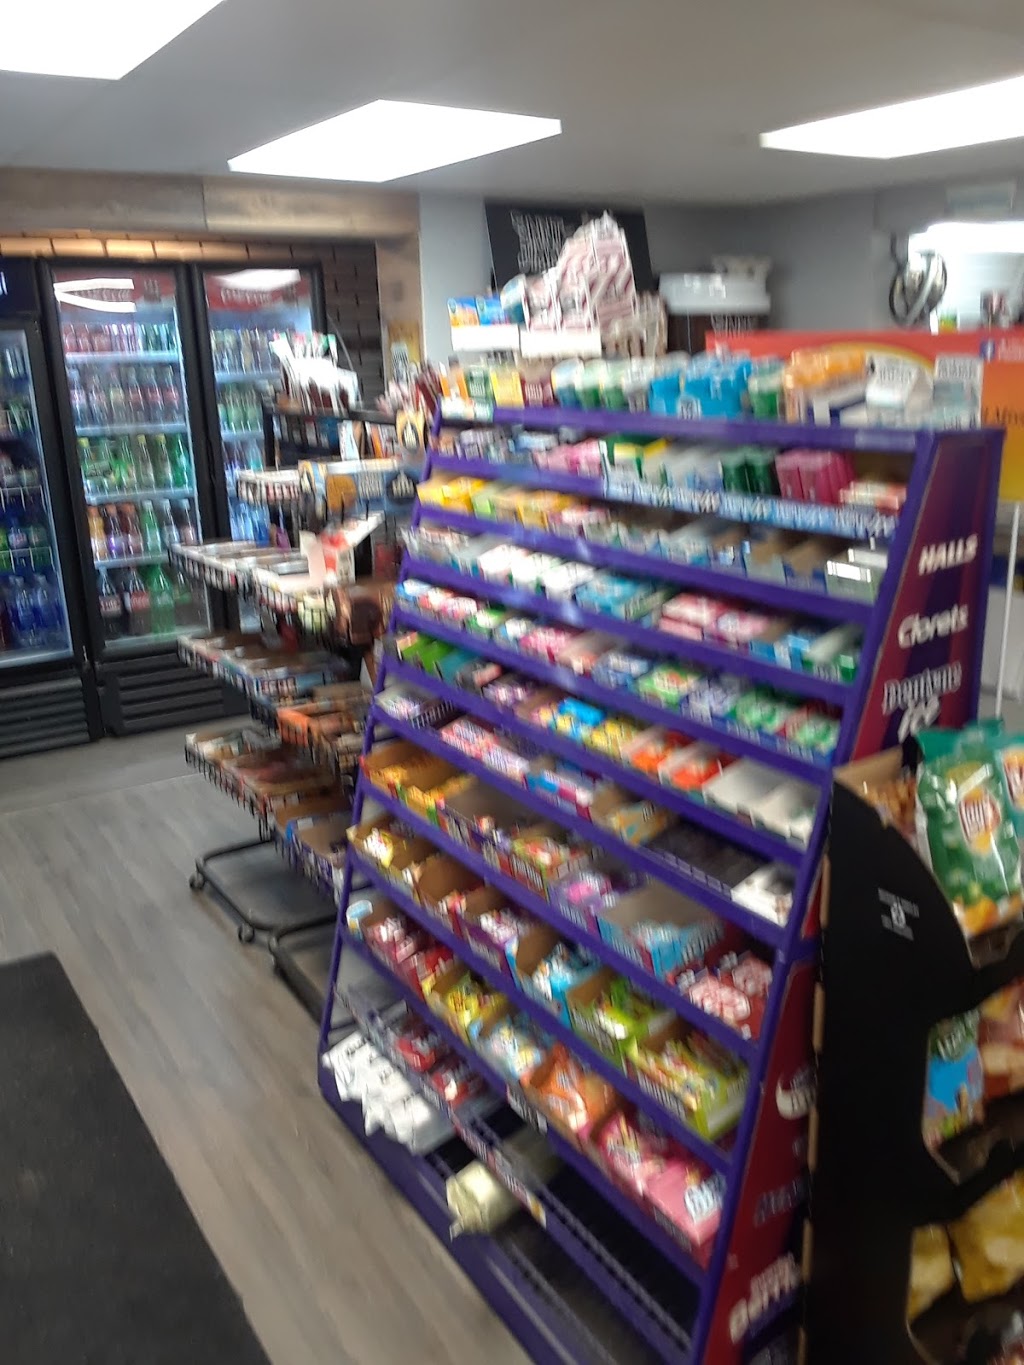 Blue Mountain Convenience | 209814 ON-26, The Blue Mountains, ON L9Y 3Z2, Canada | Phone: (705) 444-2885